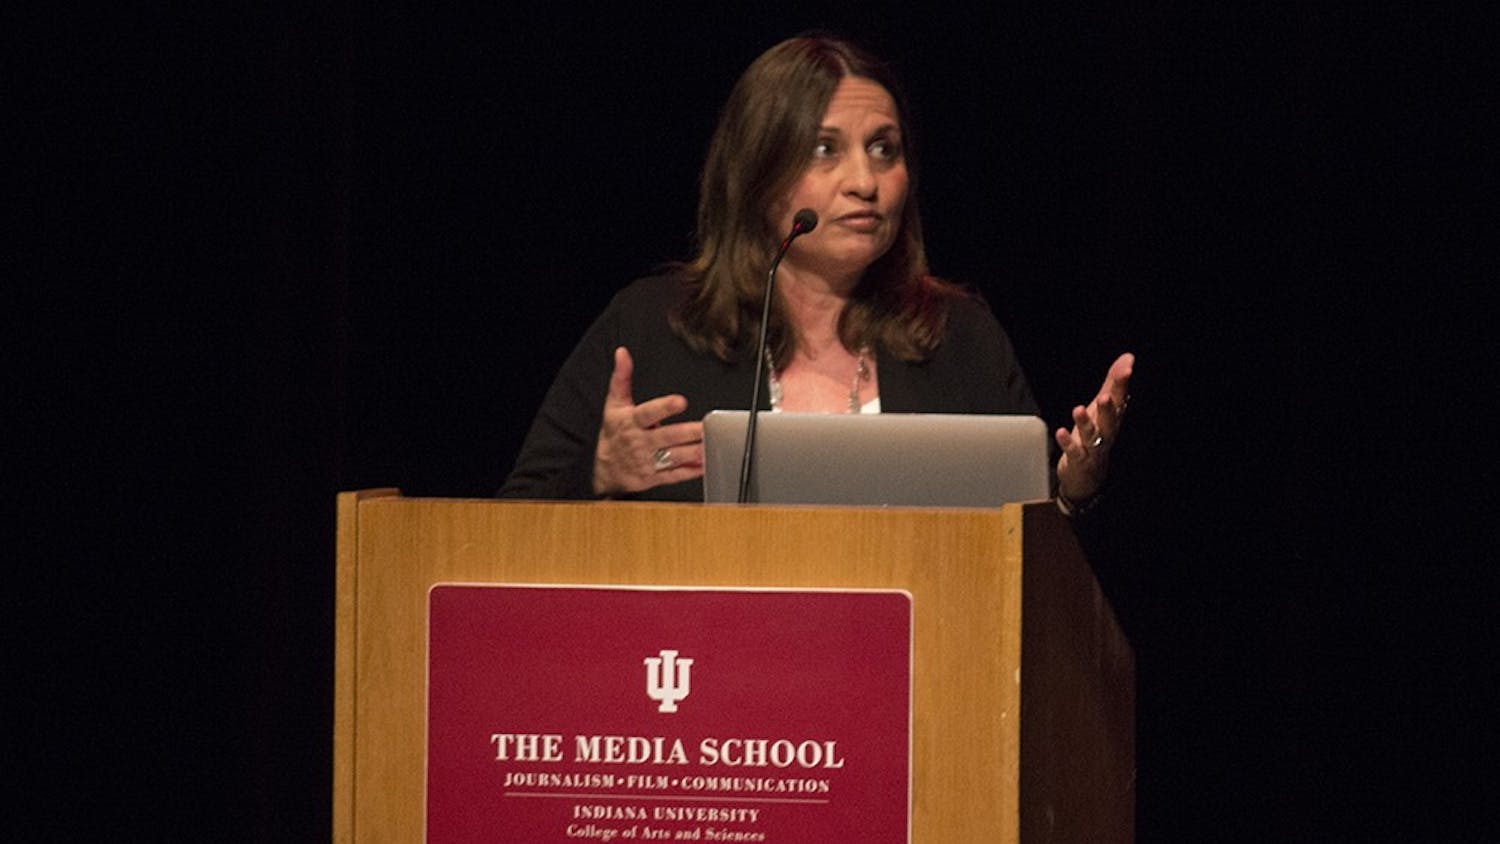 Soraya Sarhaddi Nelson speaks about her experience covering the Paris bombings during a lecture titled "War, Migration and Terror: The Globalization of Regional Conflict" on Thursday at Buskirk-Chumley Theater. The lecture was put on as a part of the Media School speaker series.